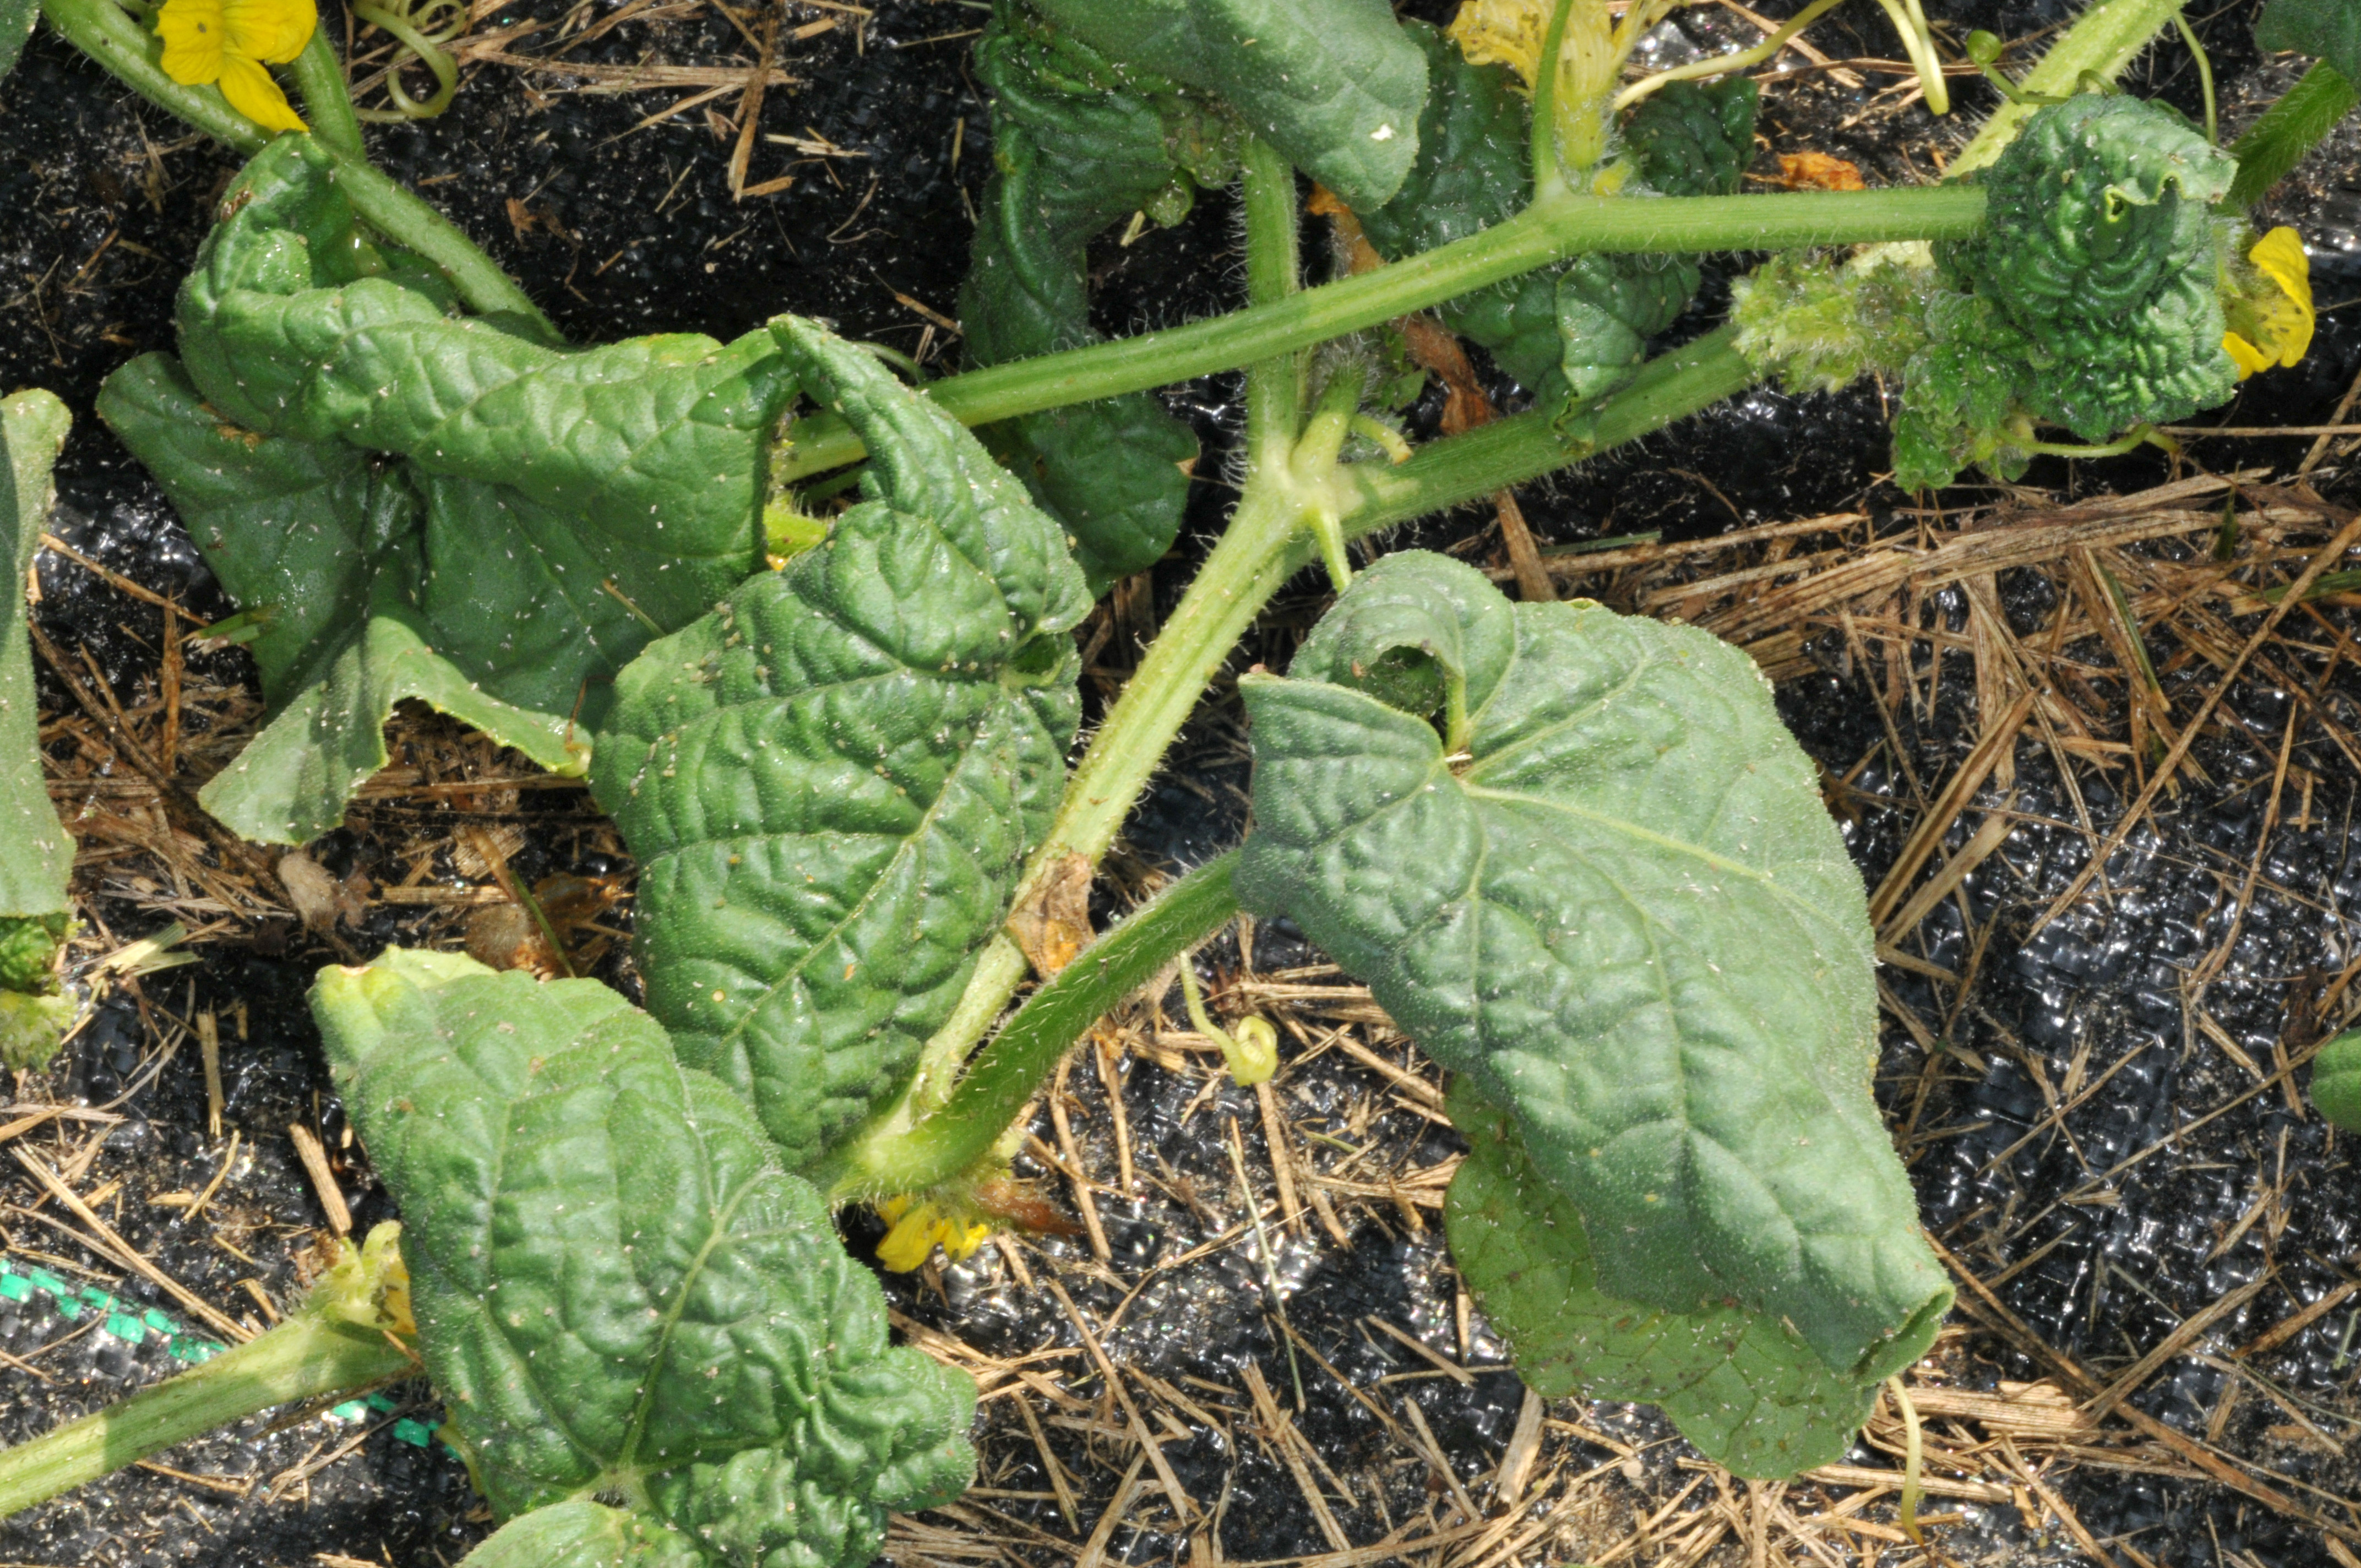 Melon aphid damage to watermelon